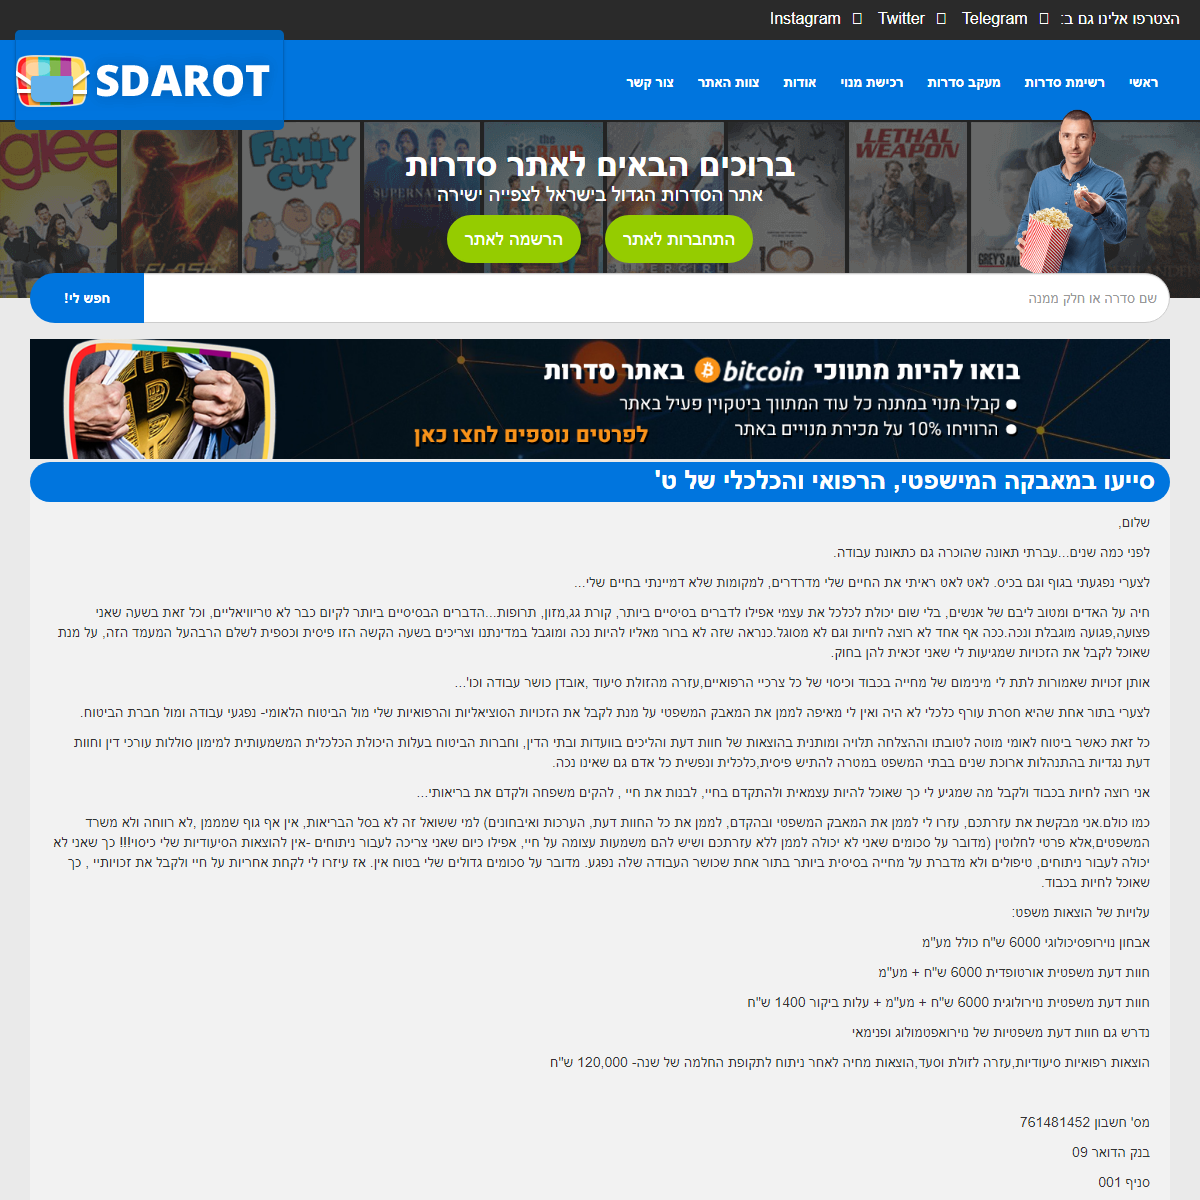 A complete backup of https://sdarot.world/content/DONATION